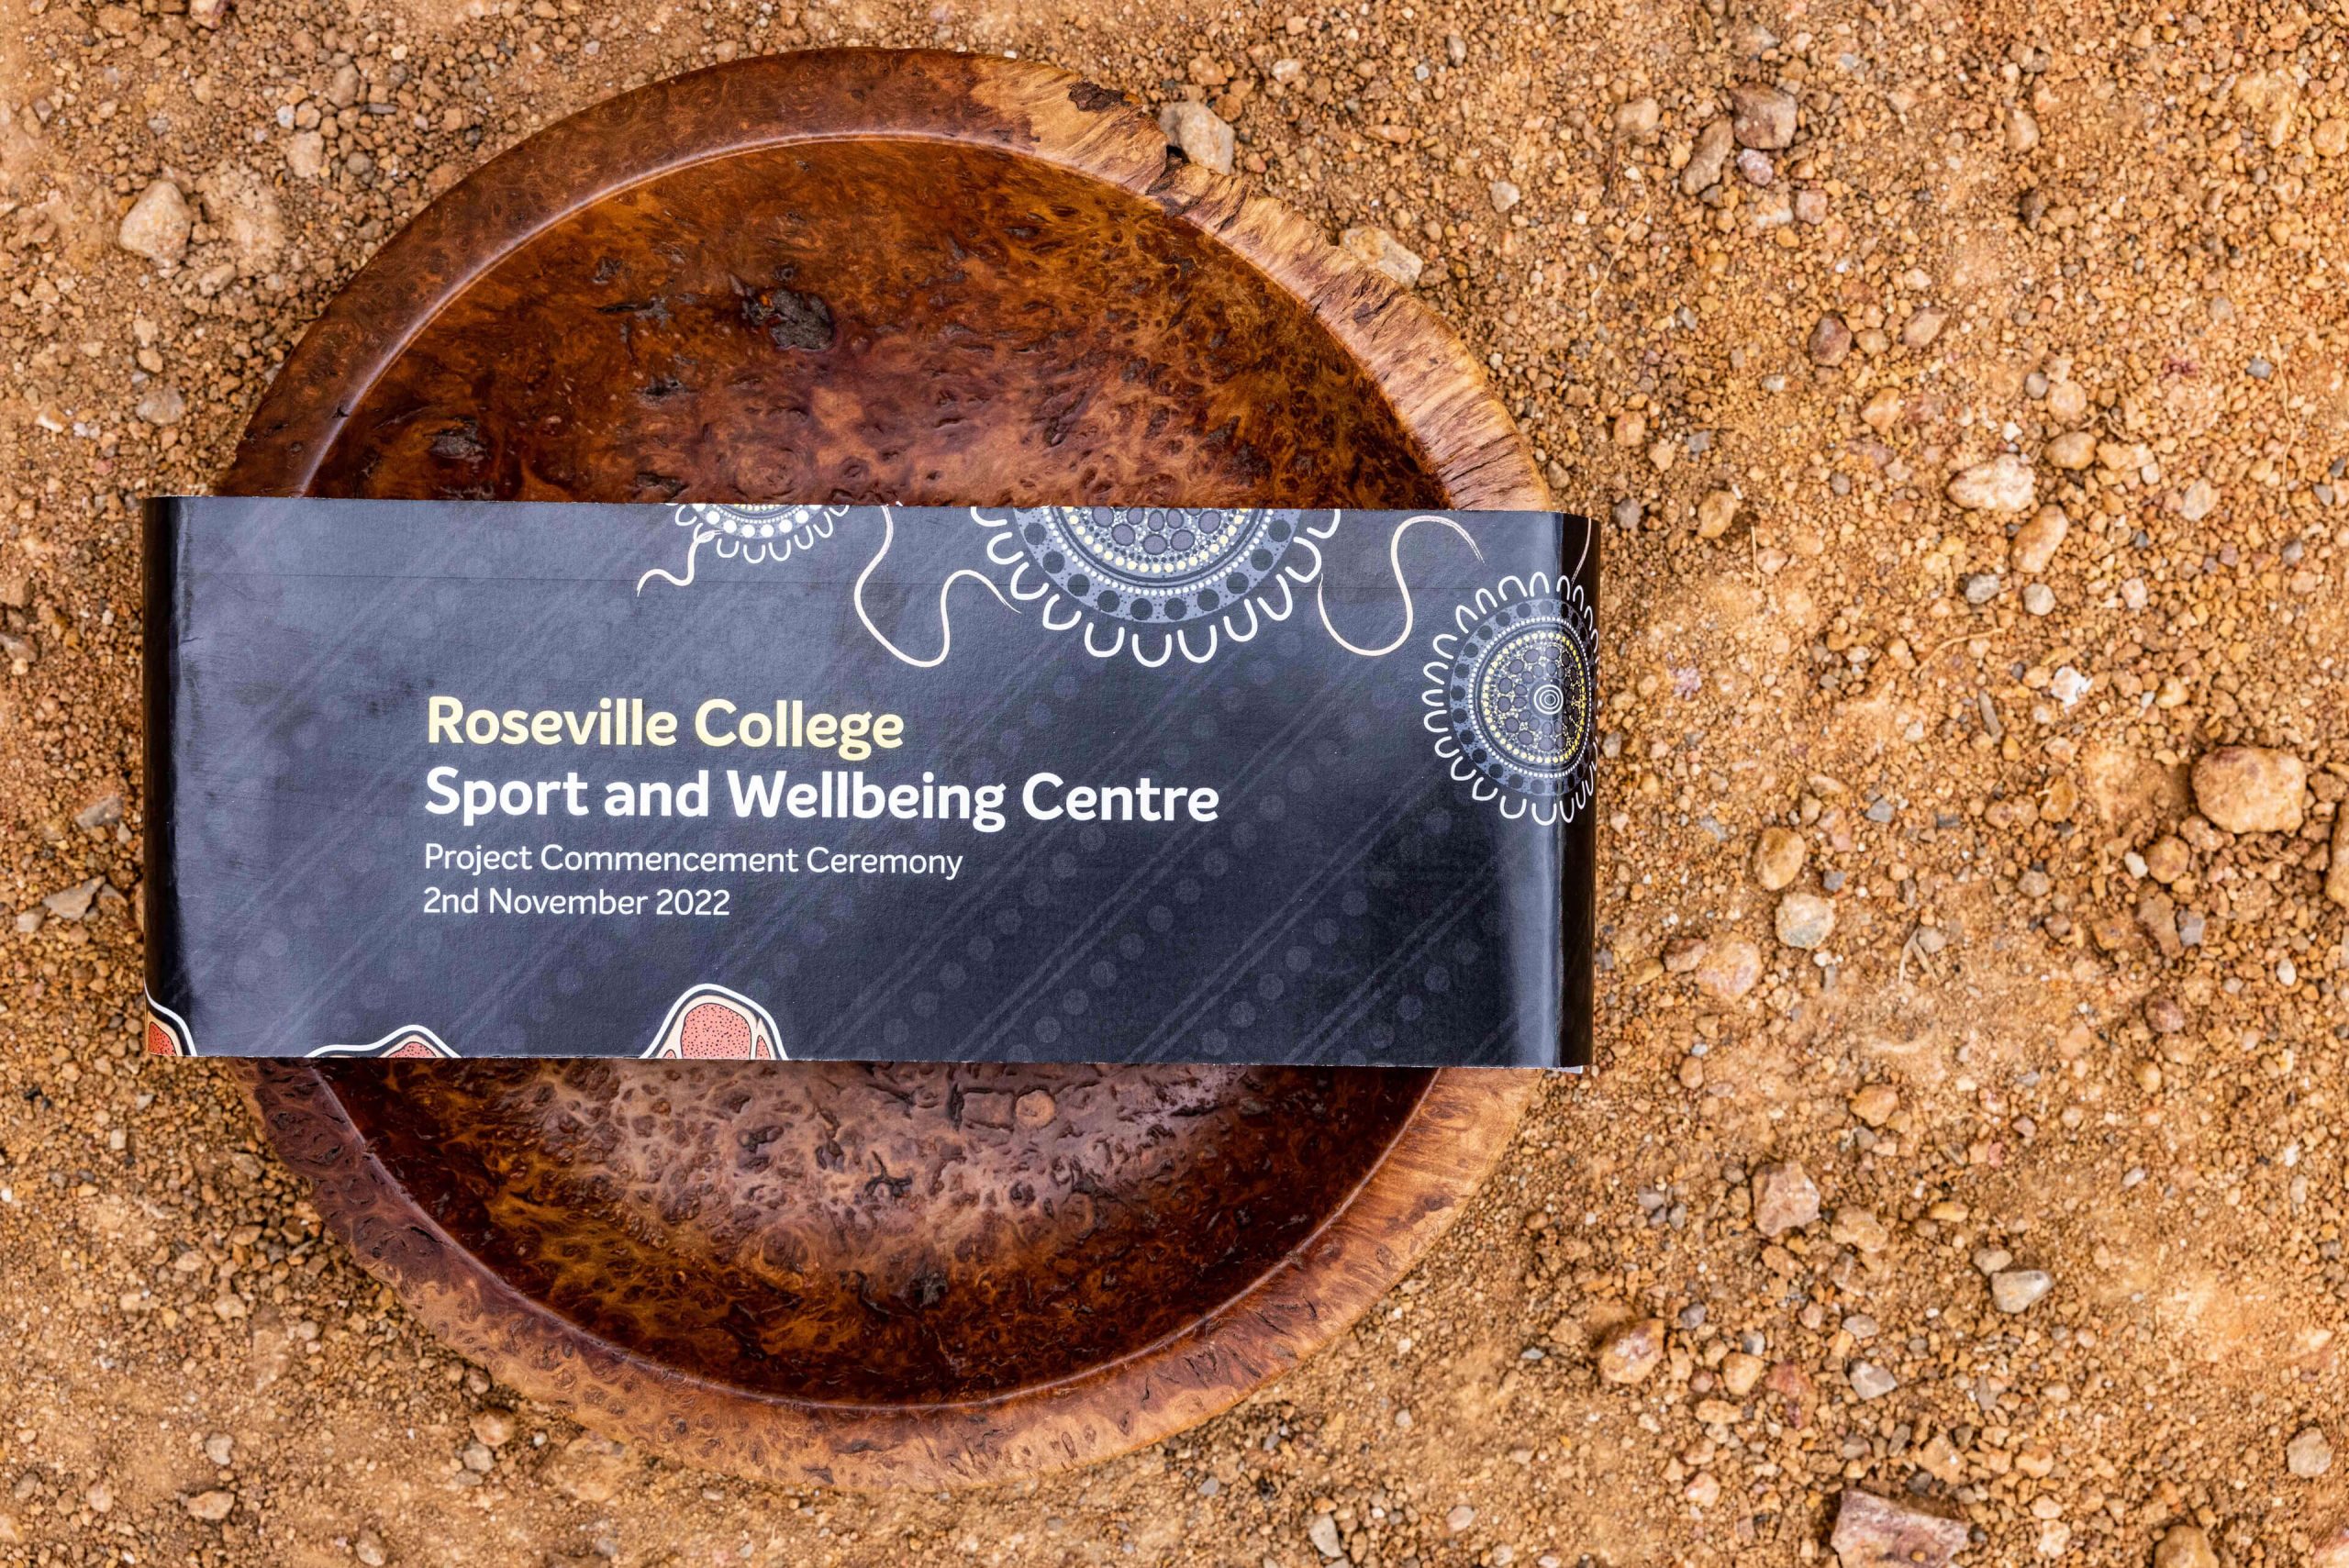 002 soil and school banner roseville college refurbishment and live environments taylor